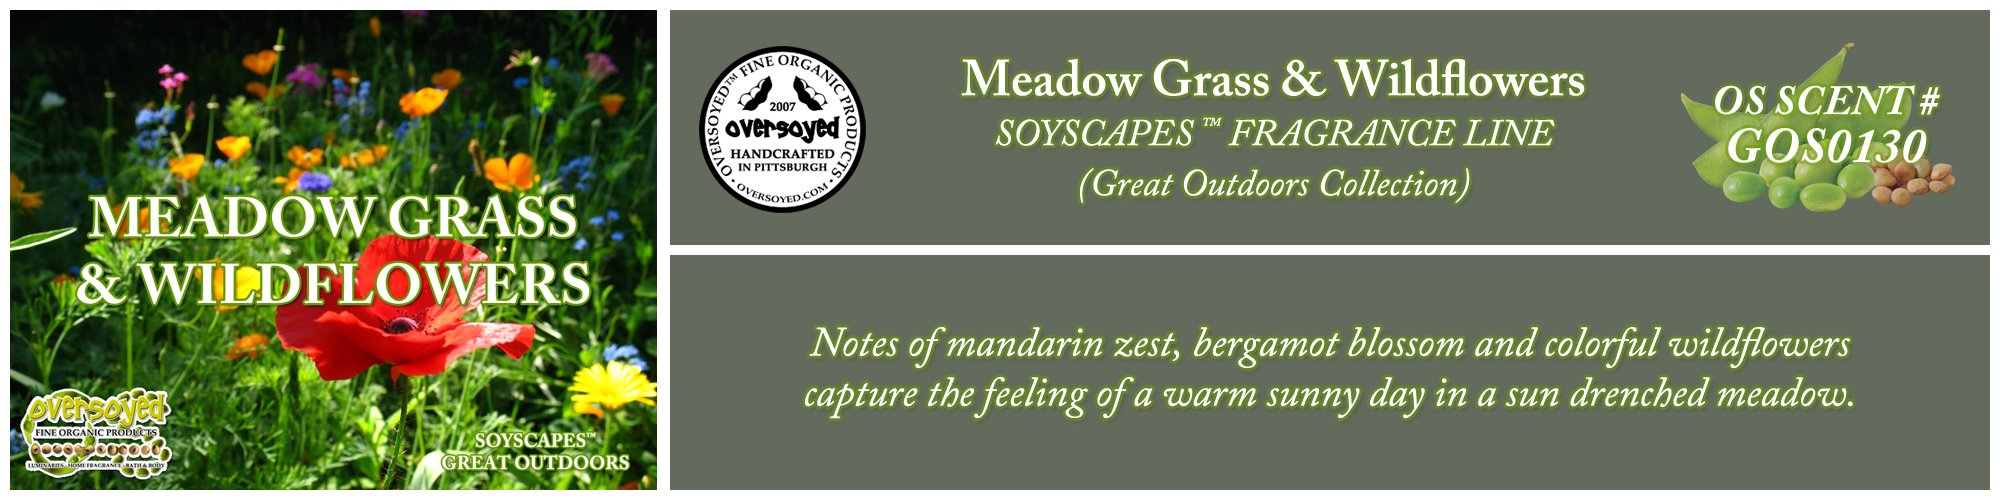 Meadow Grass & Wildflowers Handcrafted Products Collection